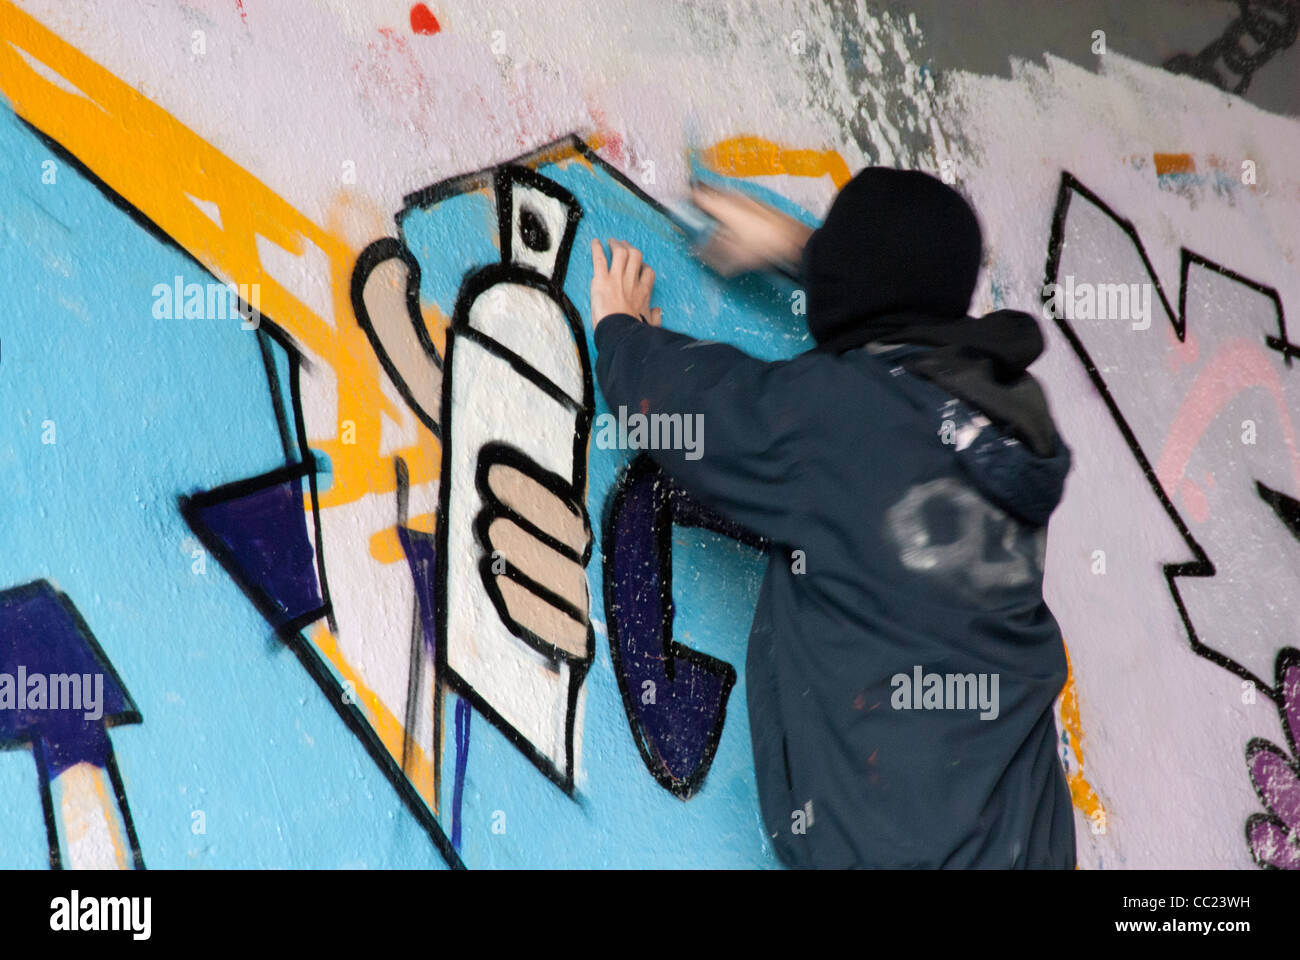 Tagging - Hooded young man spray painting graffiti. Note: Parts of man in blurred motion. Note: Parts of man in blurred motion. Stock Photo